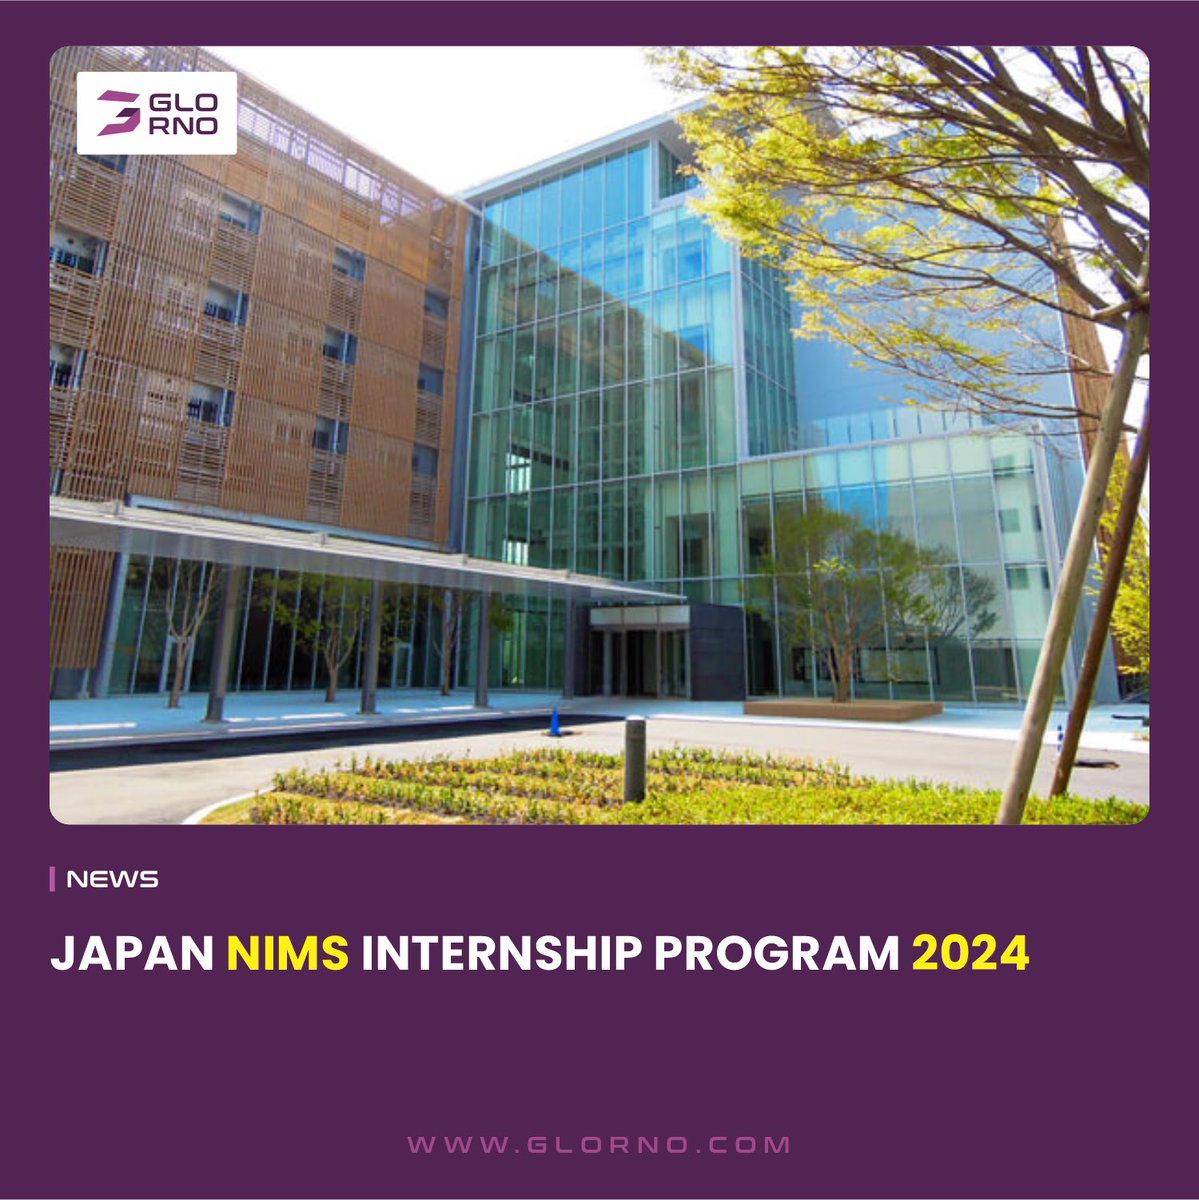 Explore cutting-edge research in Japan with the NIMS Internship Program 2024. Gain valuable experience in materials science and innovation. Apply now! glorno.com/index.php/2024…

 #NIMS #InternshipProgram #Japan #ApplyNow